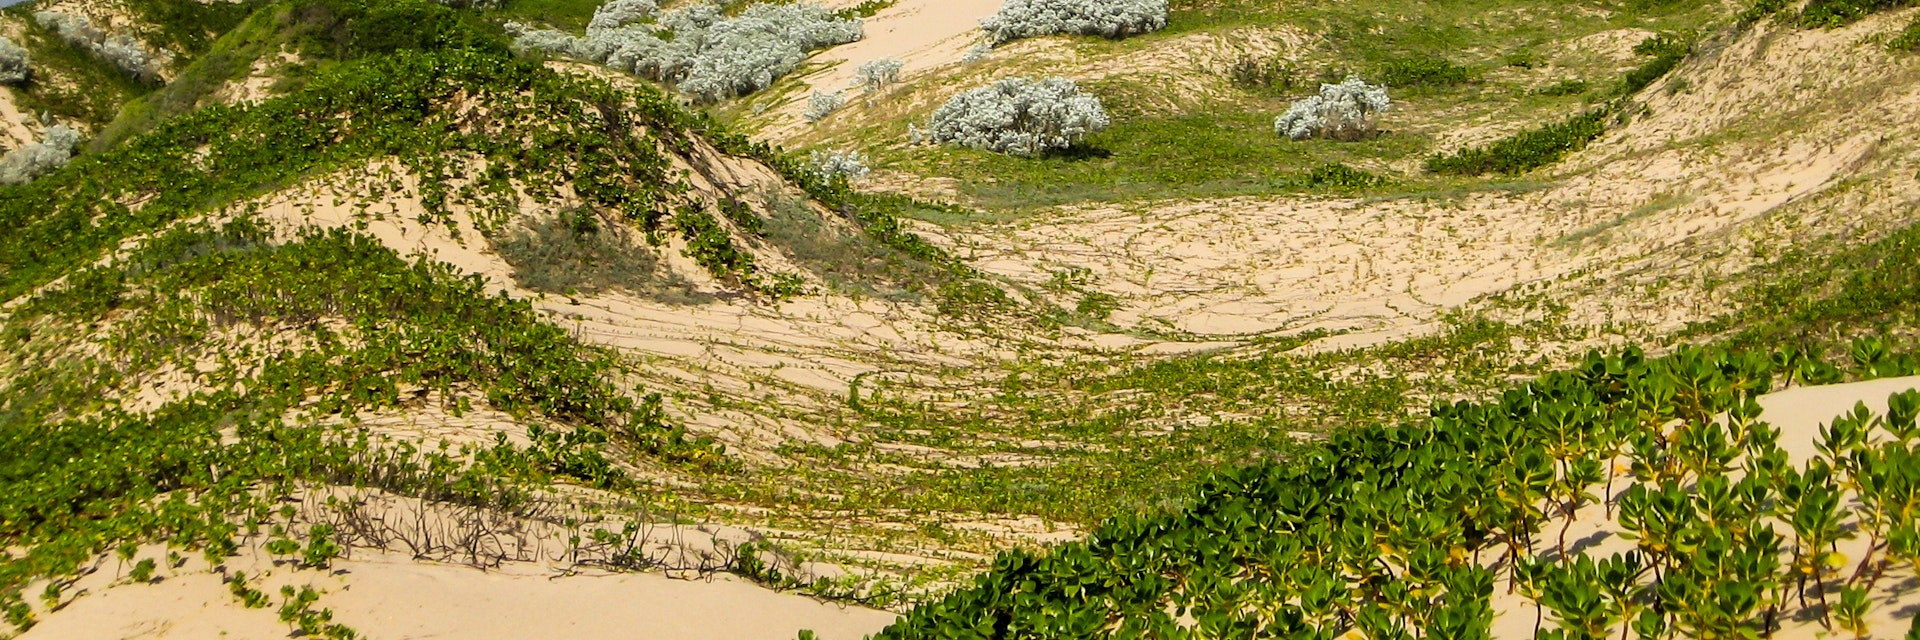 Dunes in the back beach covered with Beach bean, Gullfeed and other halophyte vegetation on the Indian Ocean side on KaNyaka Island, in Southern Mozambique